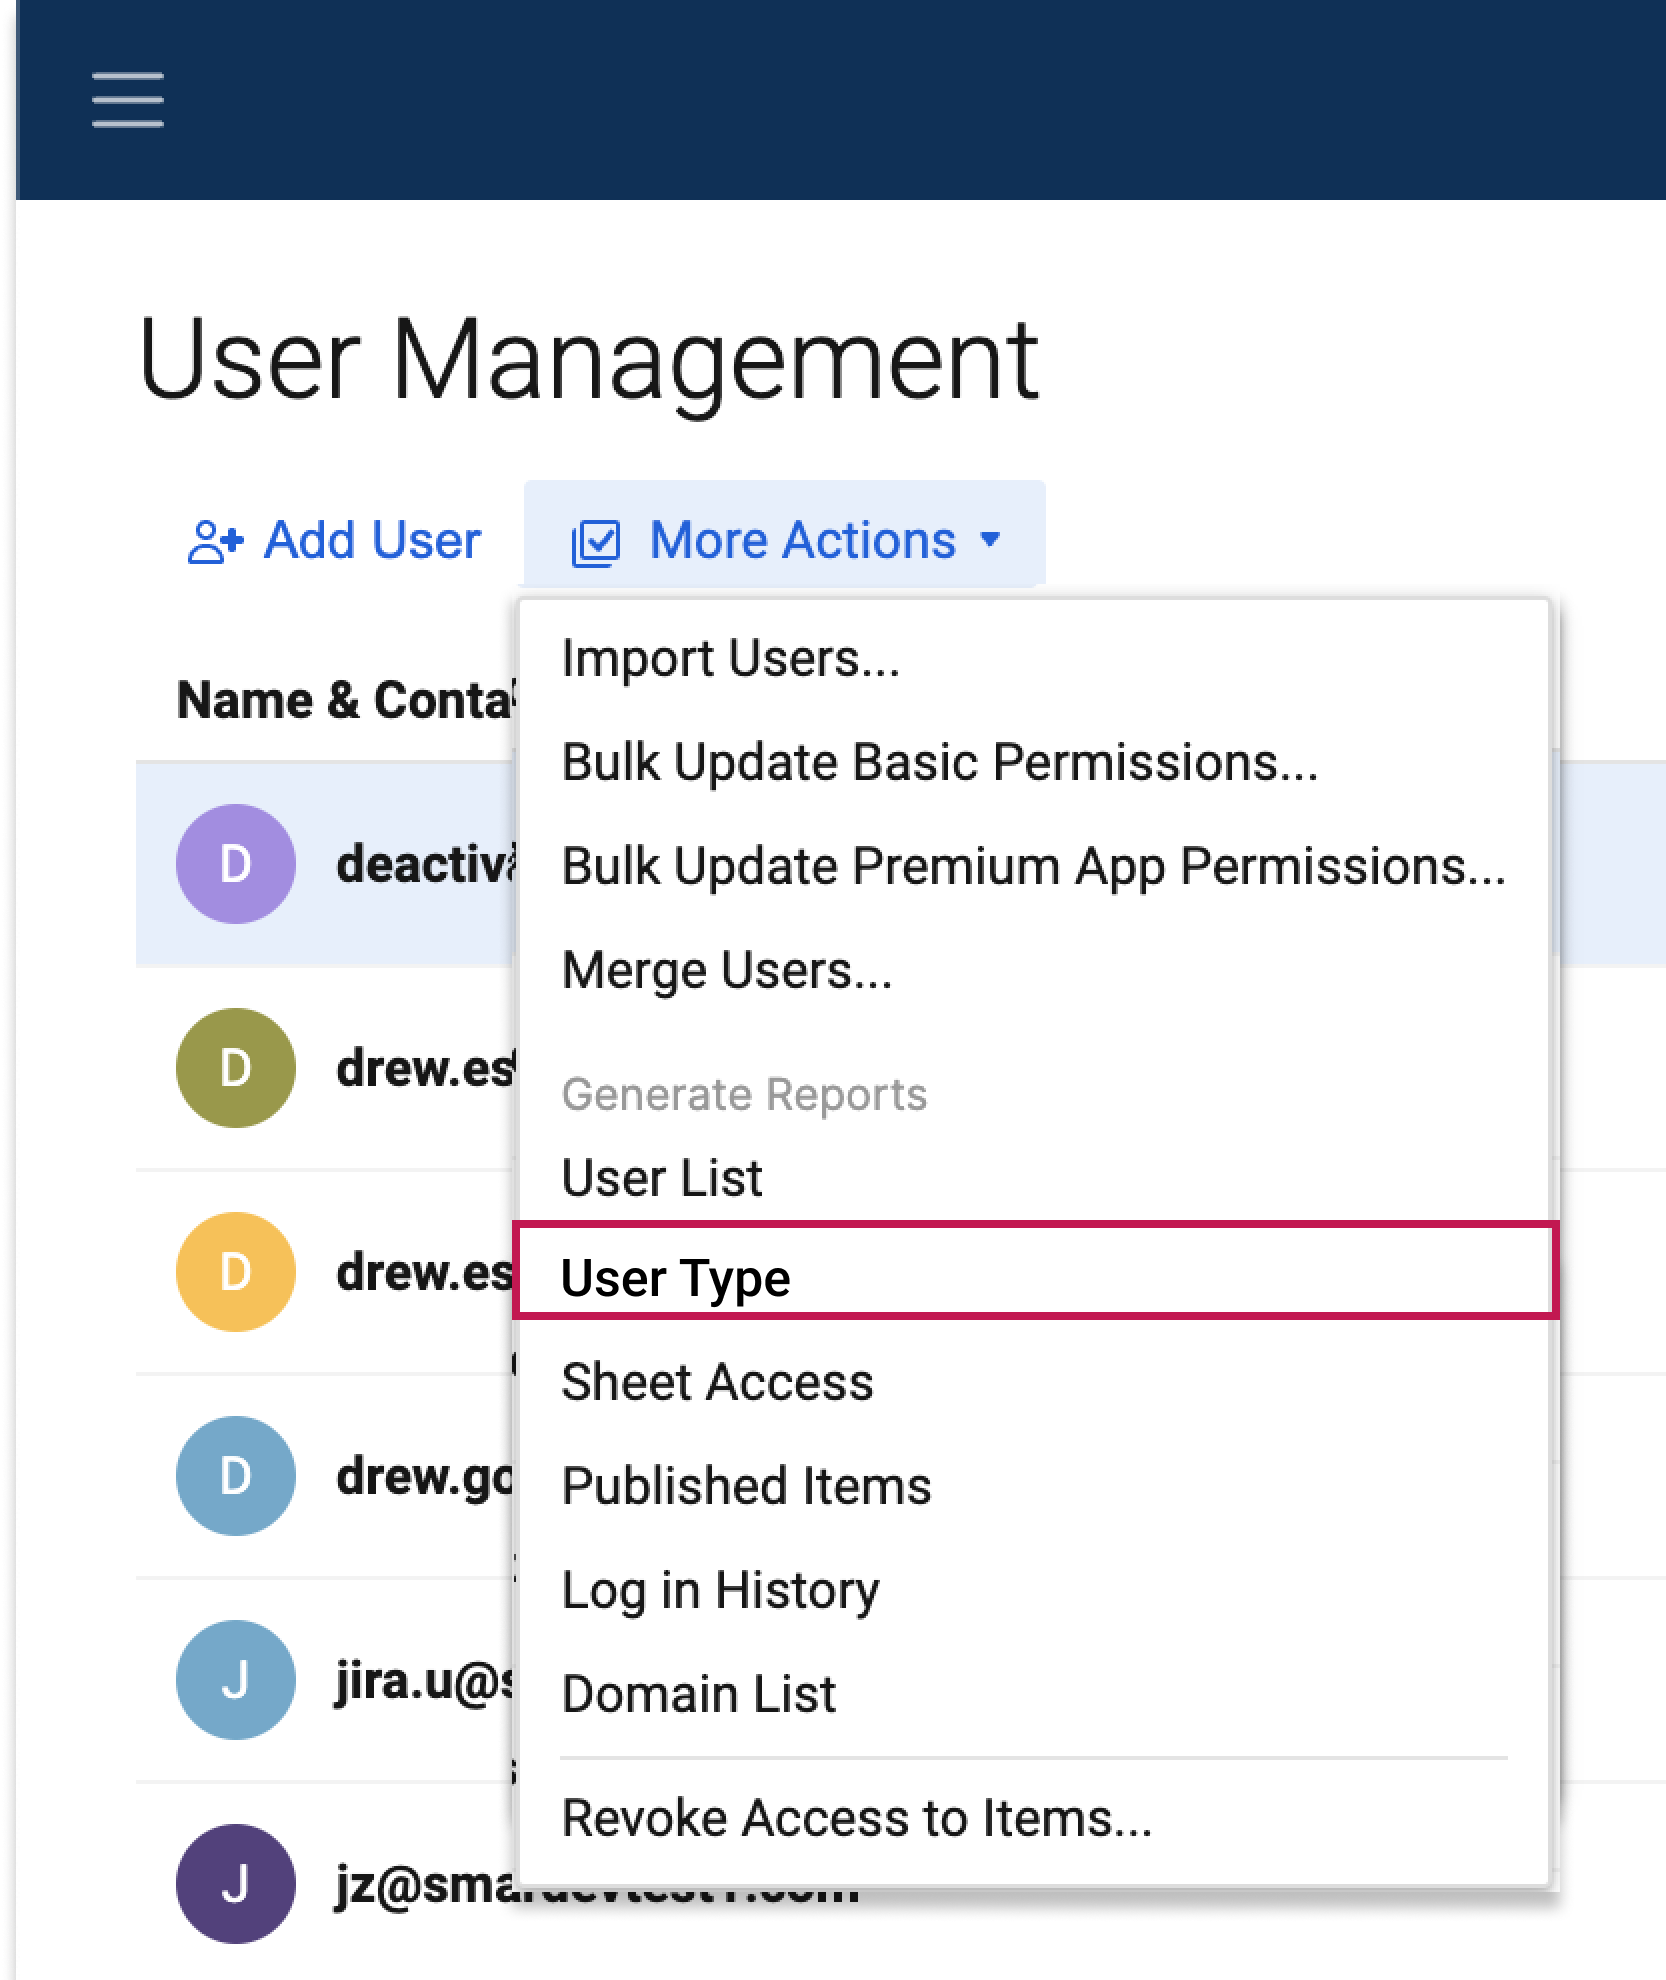 Menu item to download user type report from User Management screen